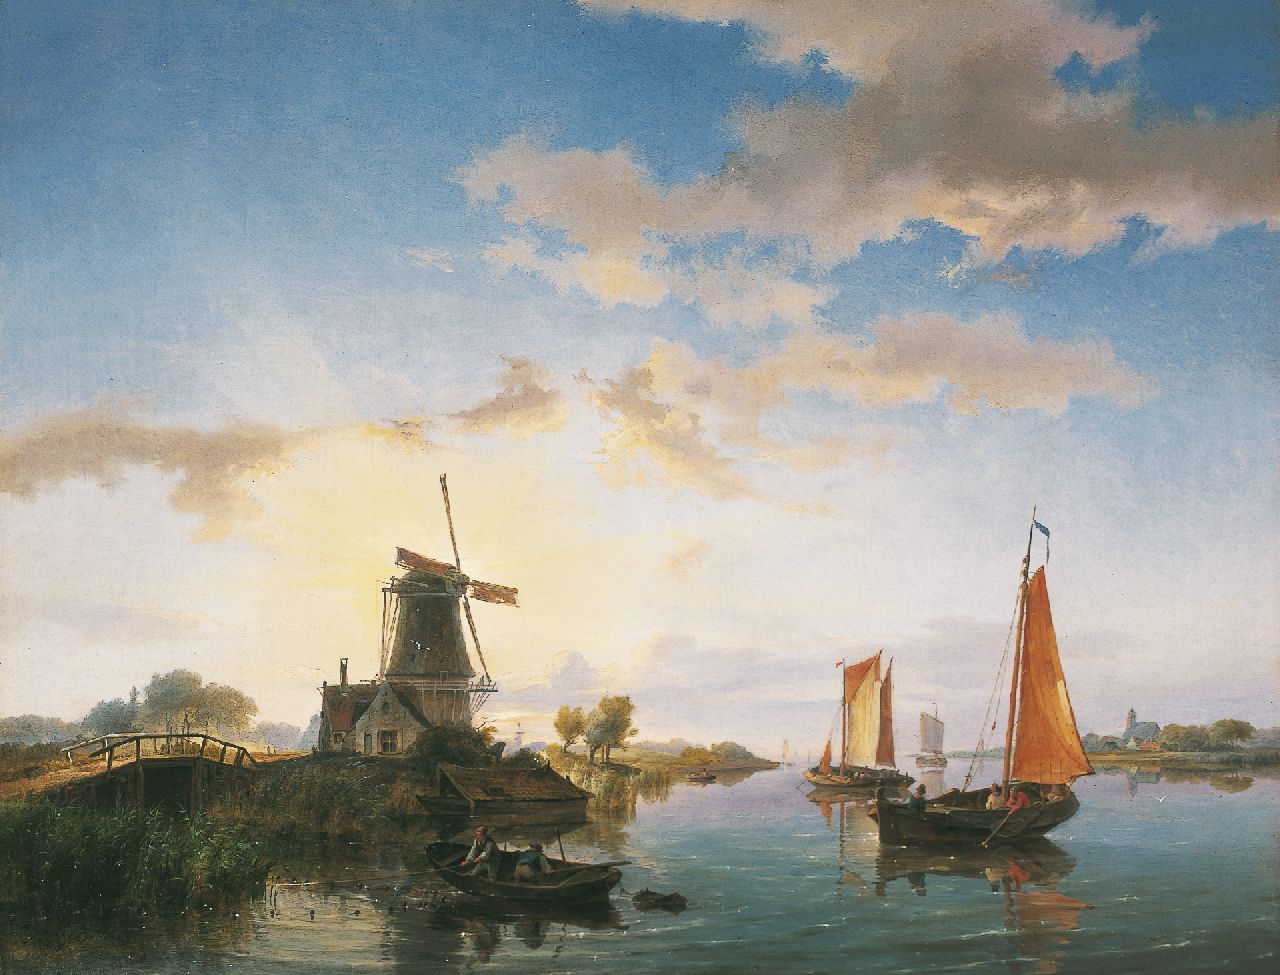 Koekkoek H.  | Hermanus Koekkoek, A river landscape at sunset, oil on canvas 40.5 x 52.3 cm, signed l.l. and on a label on the reverse and dated 1845